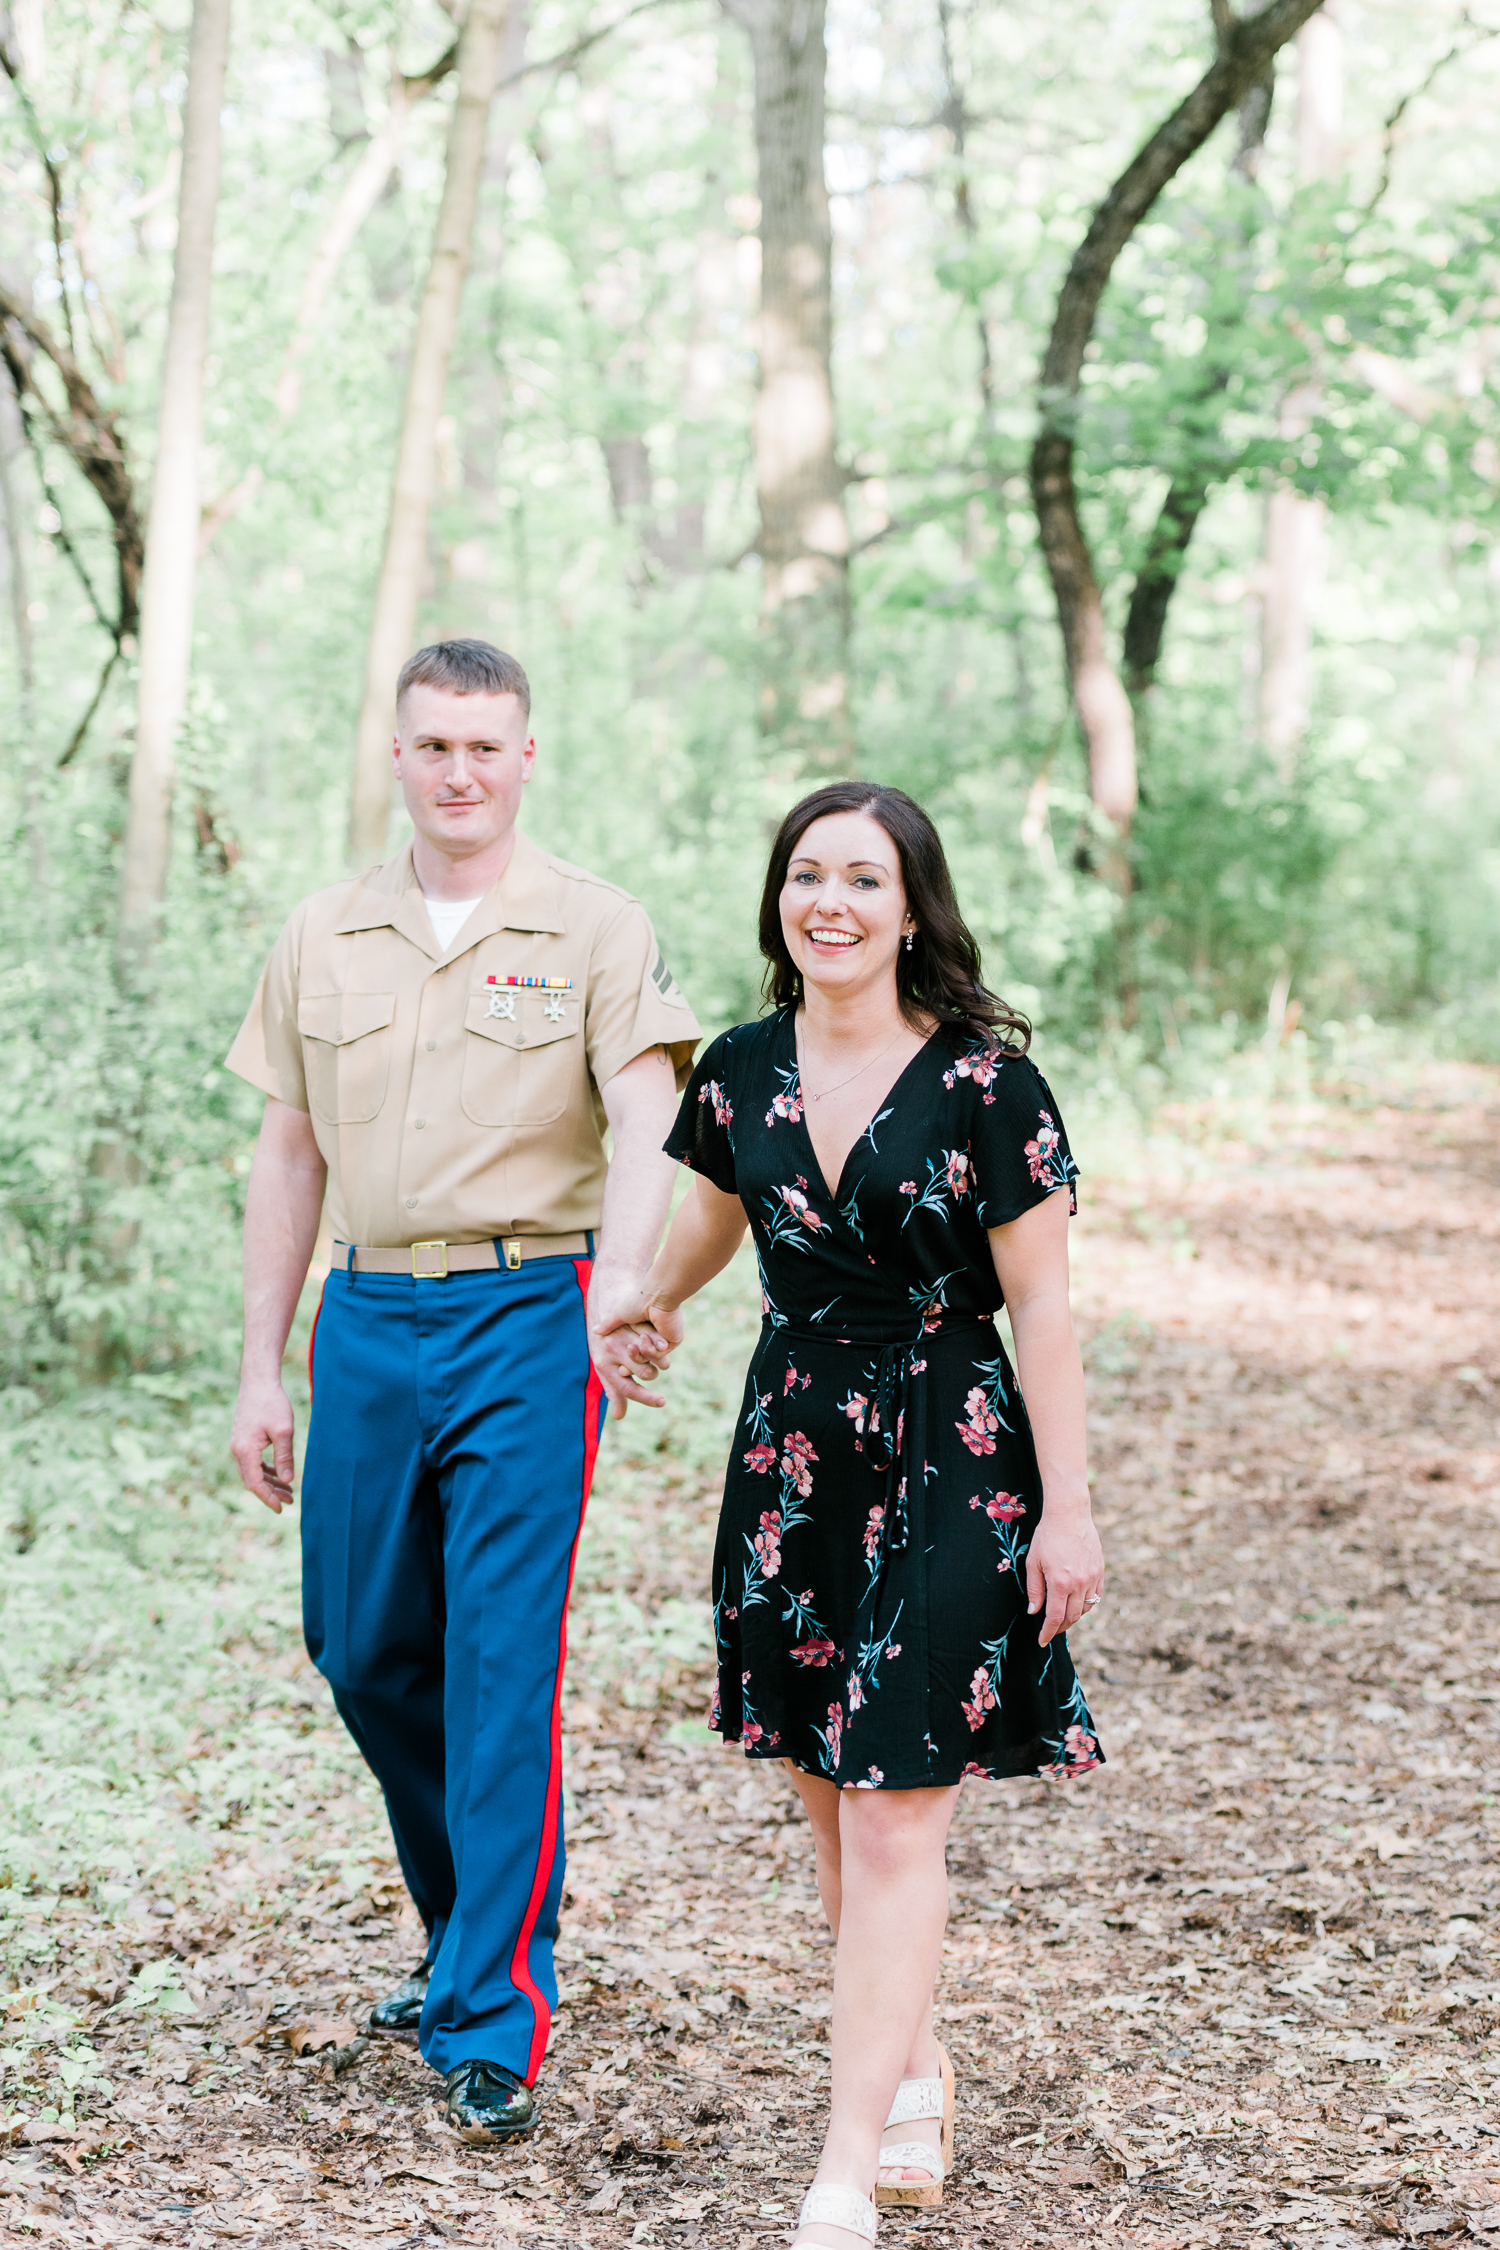 Girl in black floral dress and guy in military uniform hold hands while walking in the park